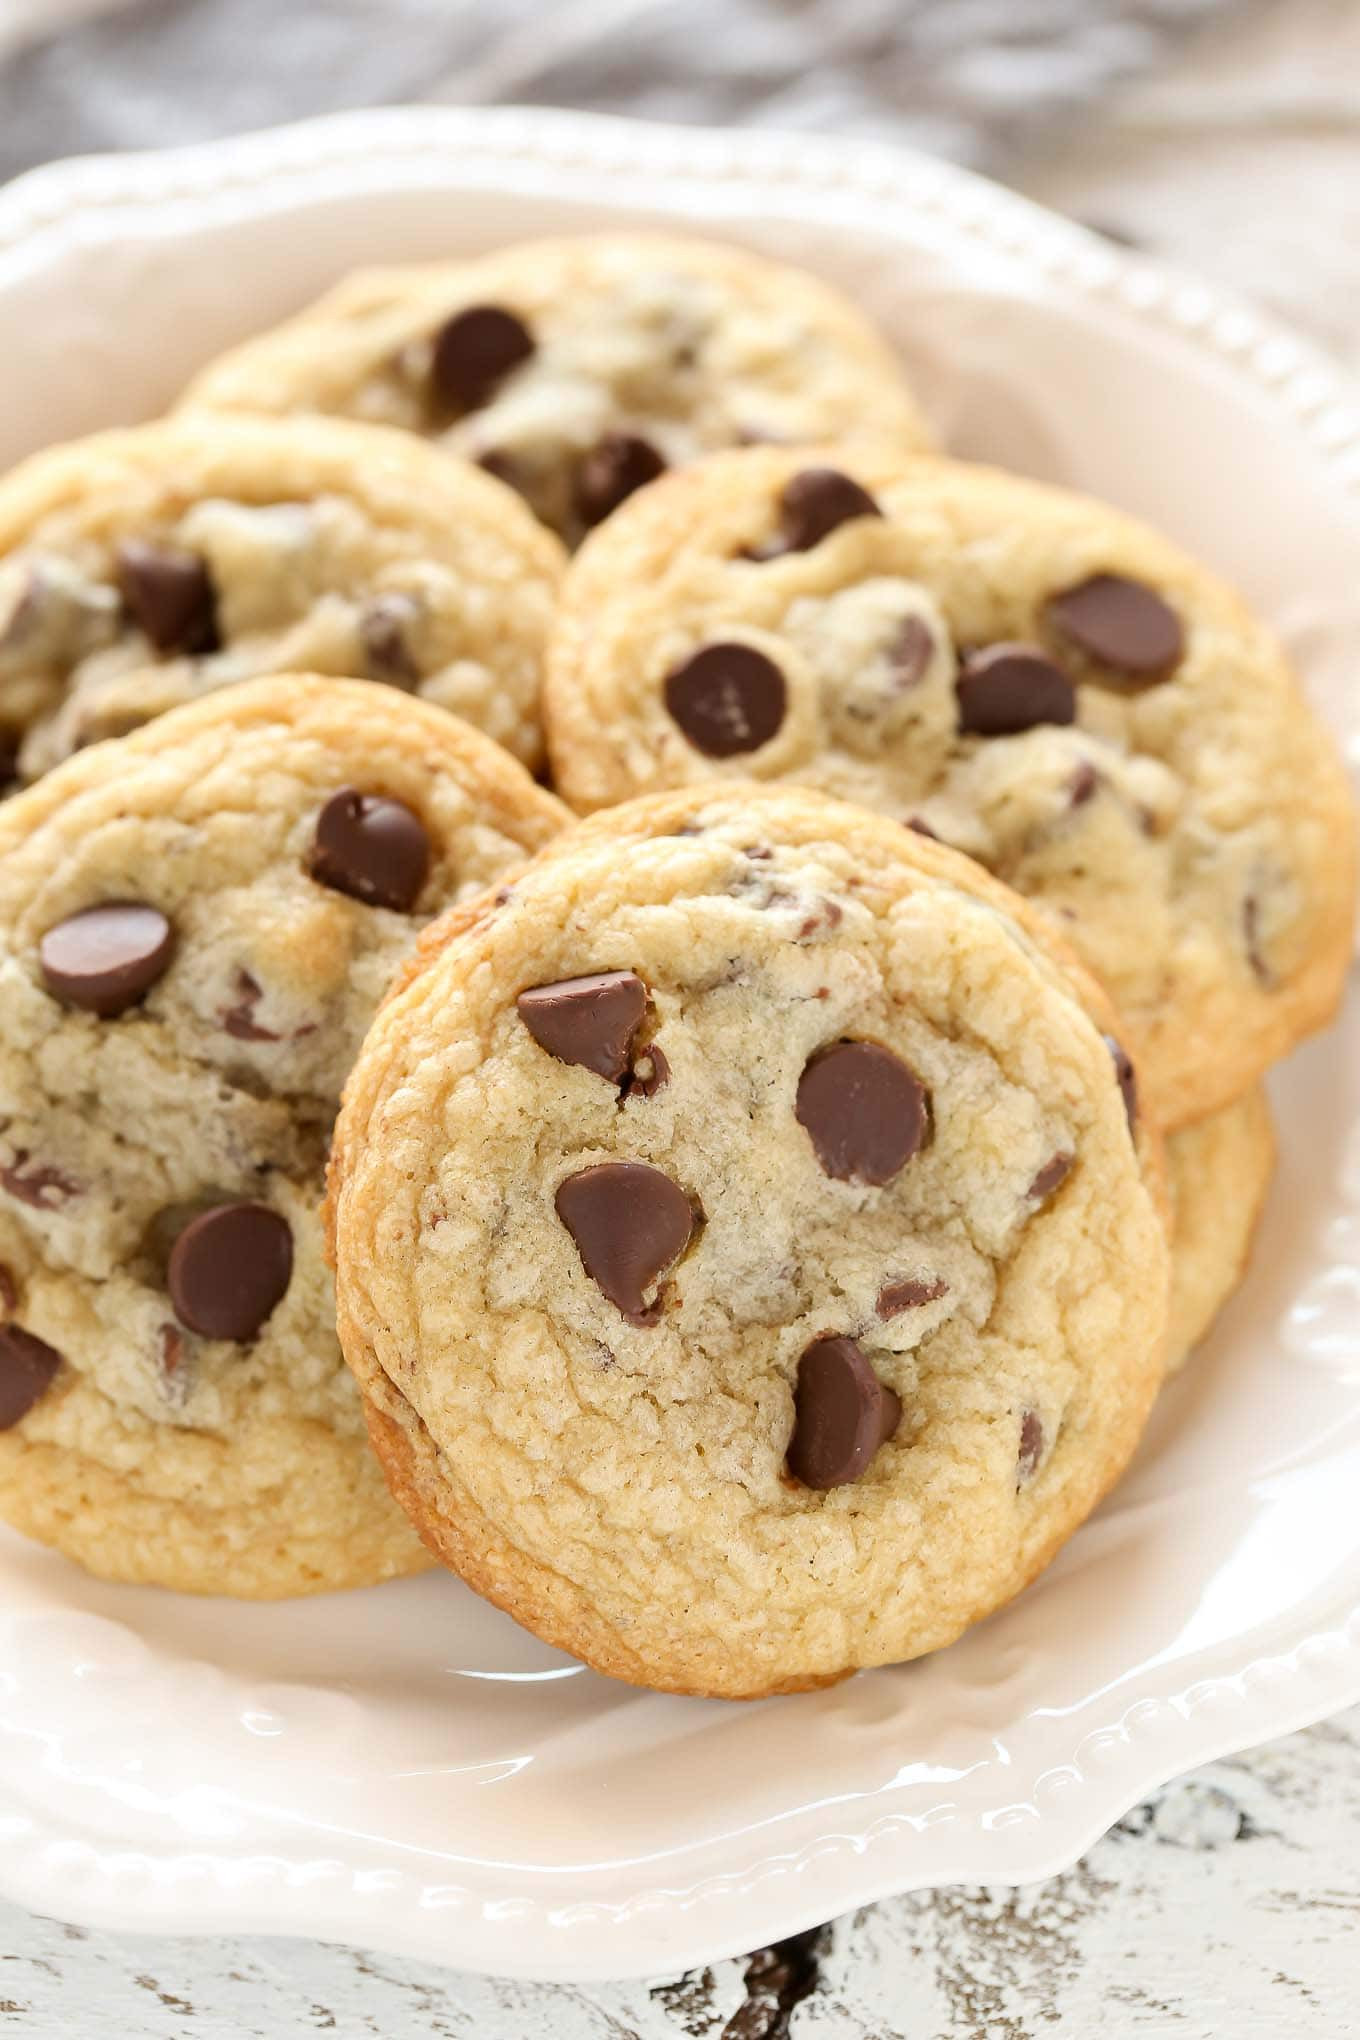 Soft Chewy Choc Chip Cookies Recipe
 Soft and Chewy Chocolate Chip Cookies Recipe